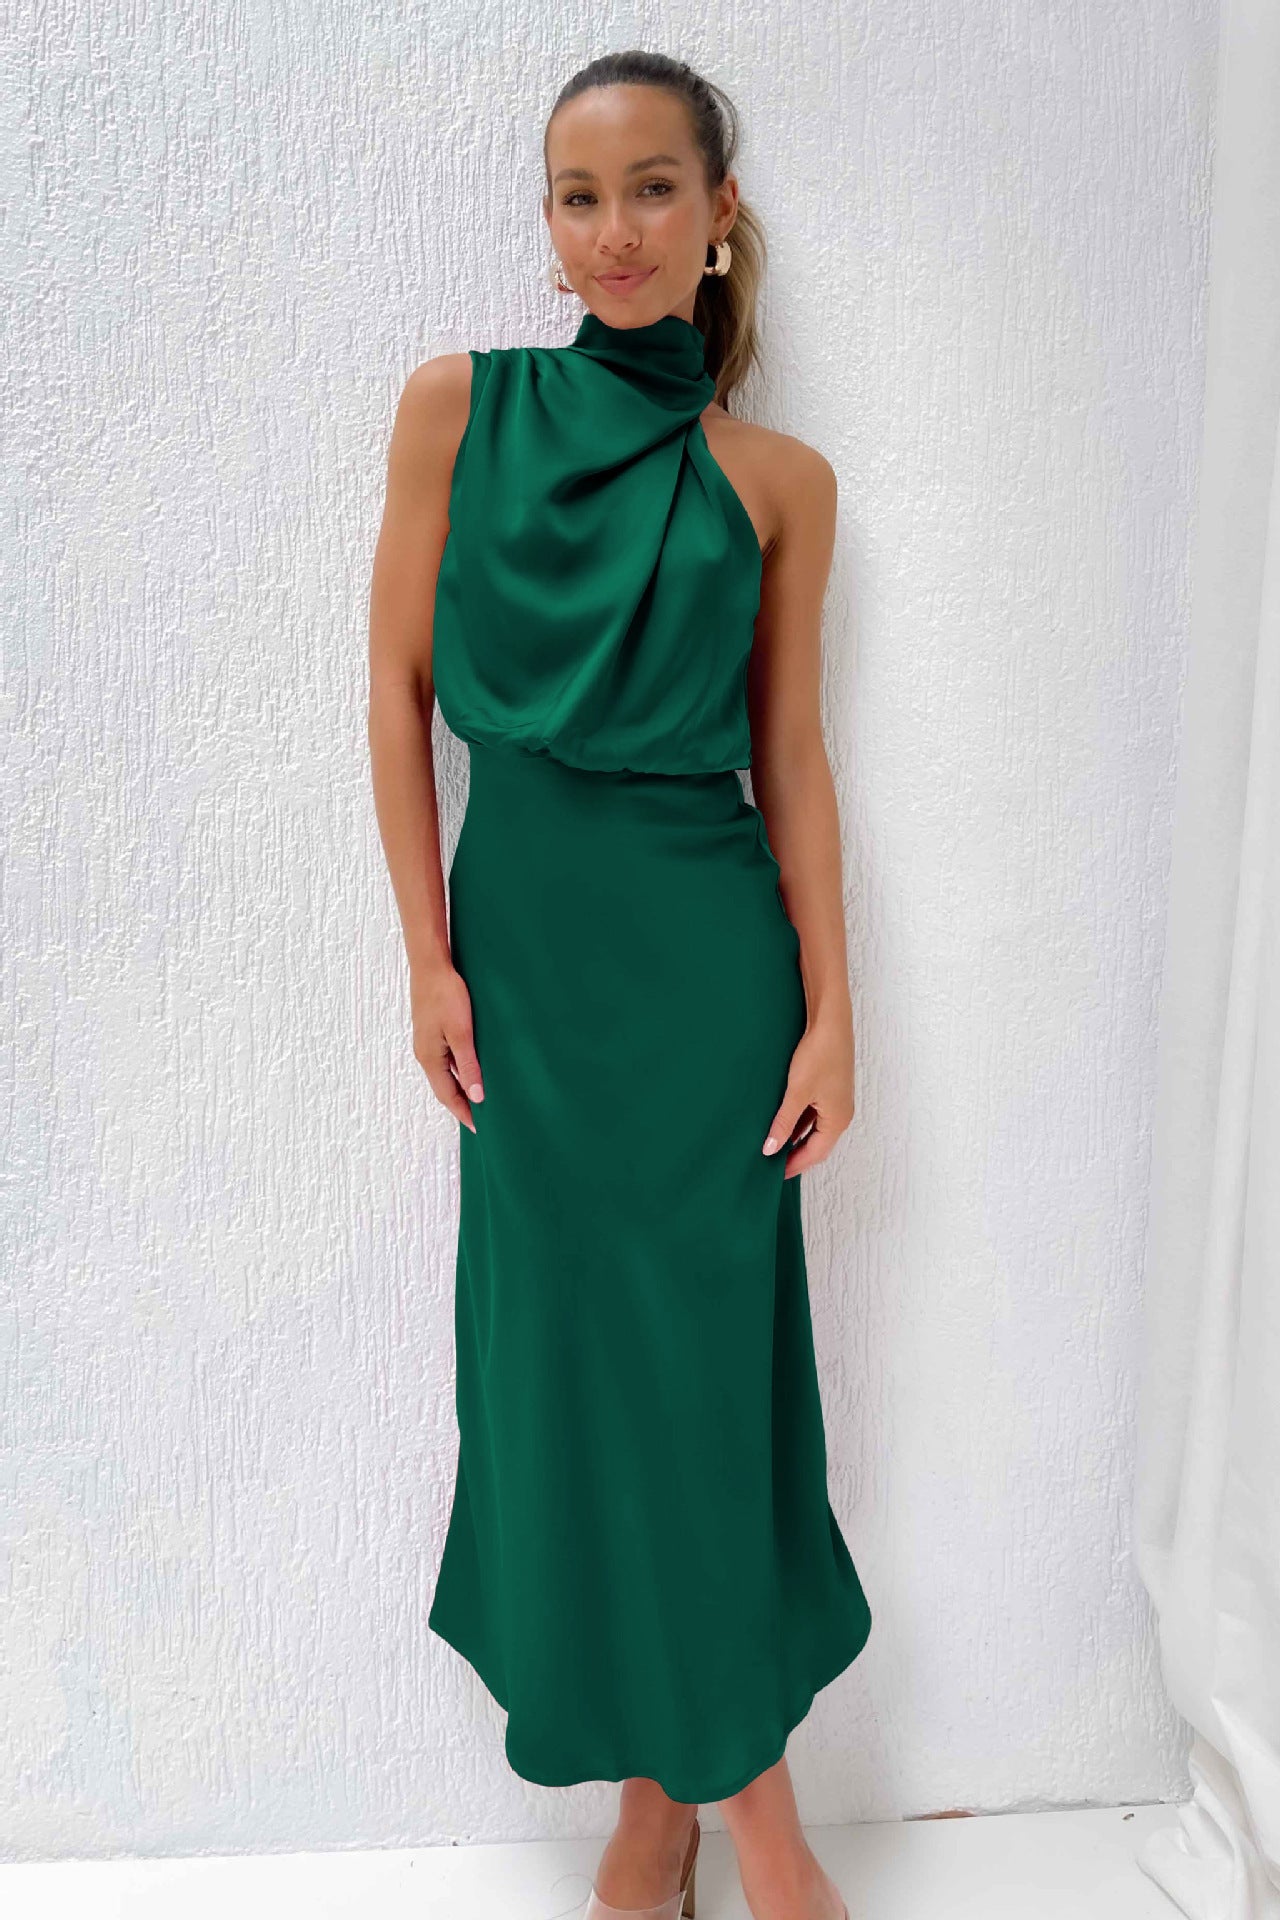 Sexy Halter Women Evening Party Dresses-Dresses-Dark Green-S-Free Shipping at meselling99